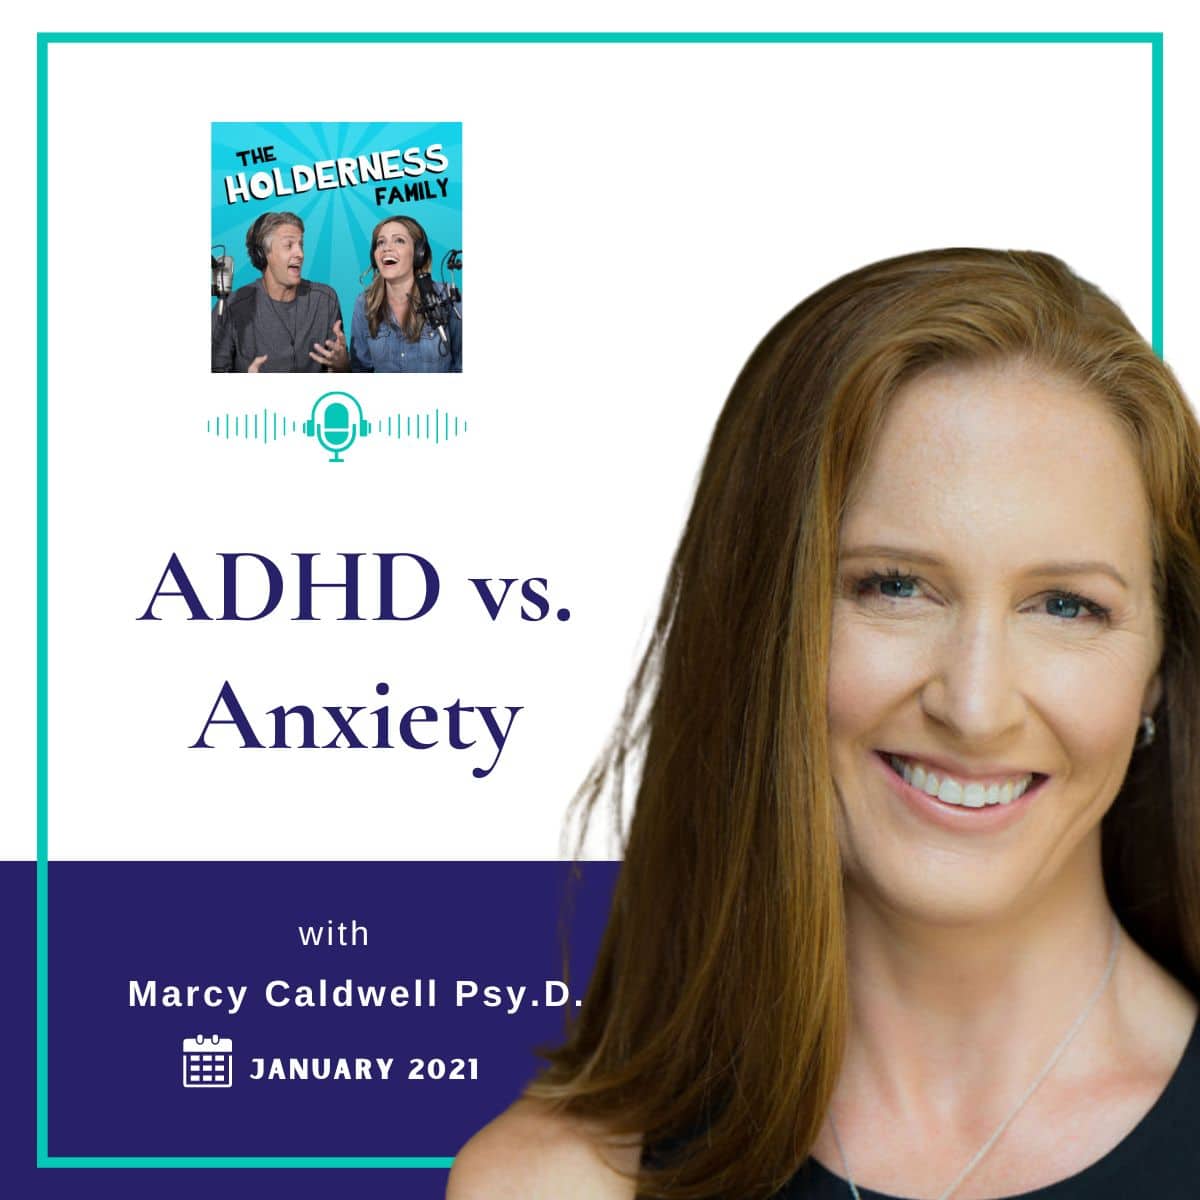 ADHD vs. Anxiety Couples | Marcy Caldwell, Psy.D.